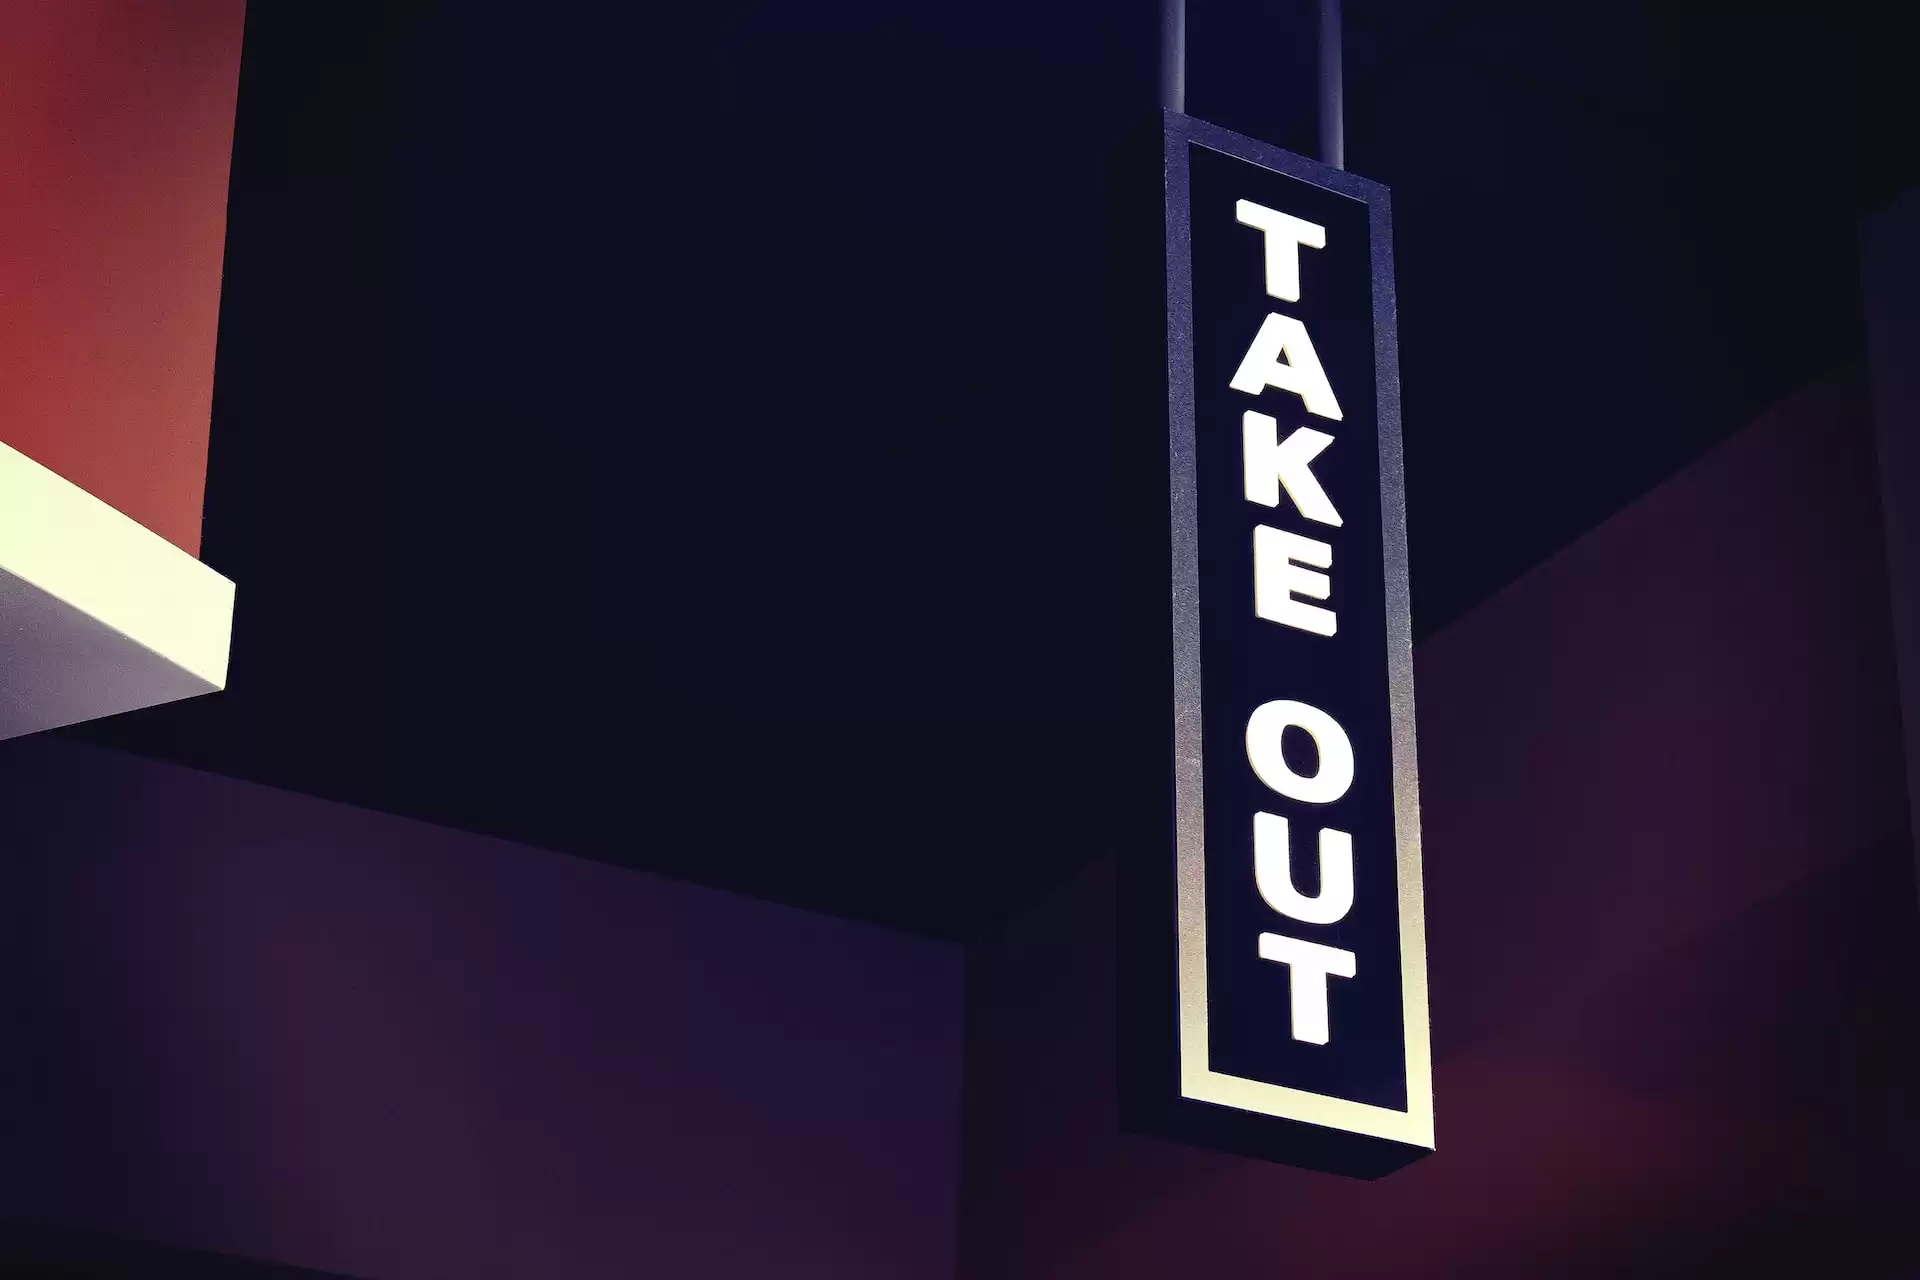 Takeout sign for a restaurant